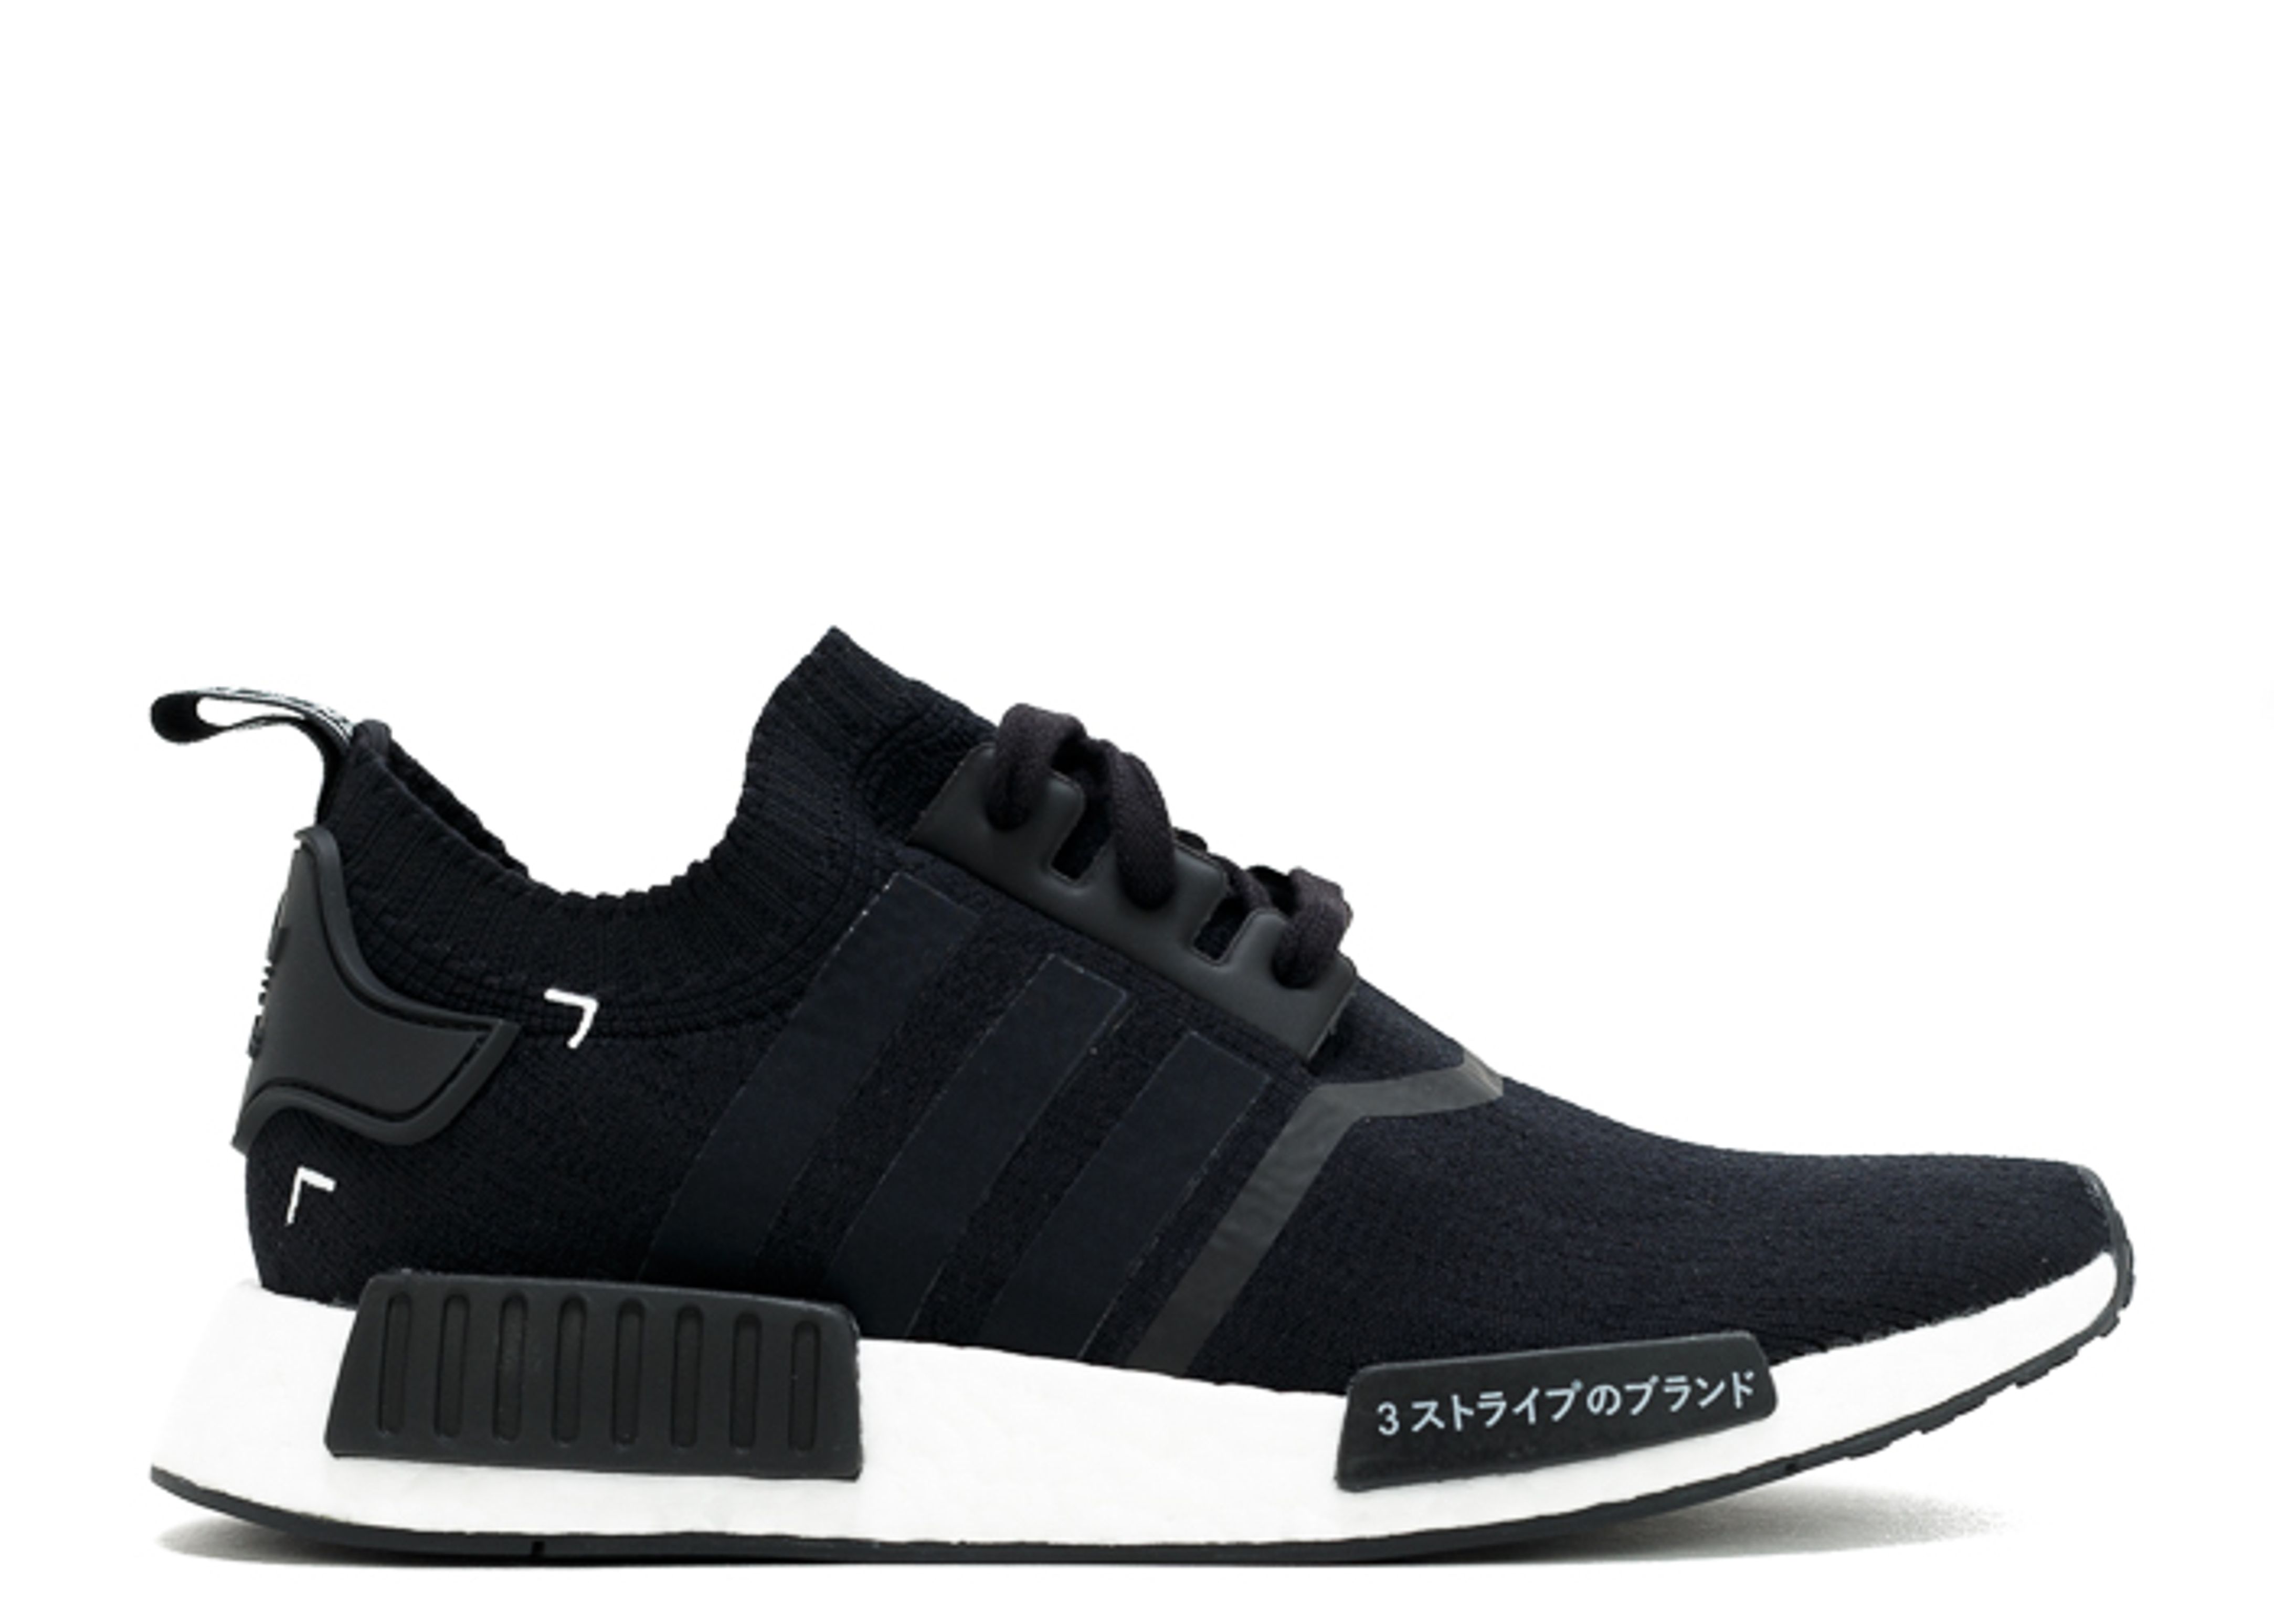 Adidas NMD R1 x Bedwin and The Heartbreakers (#1014797) from